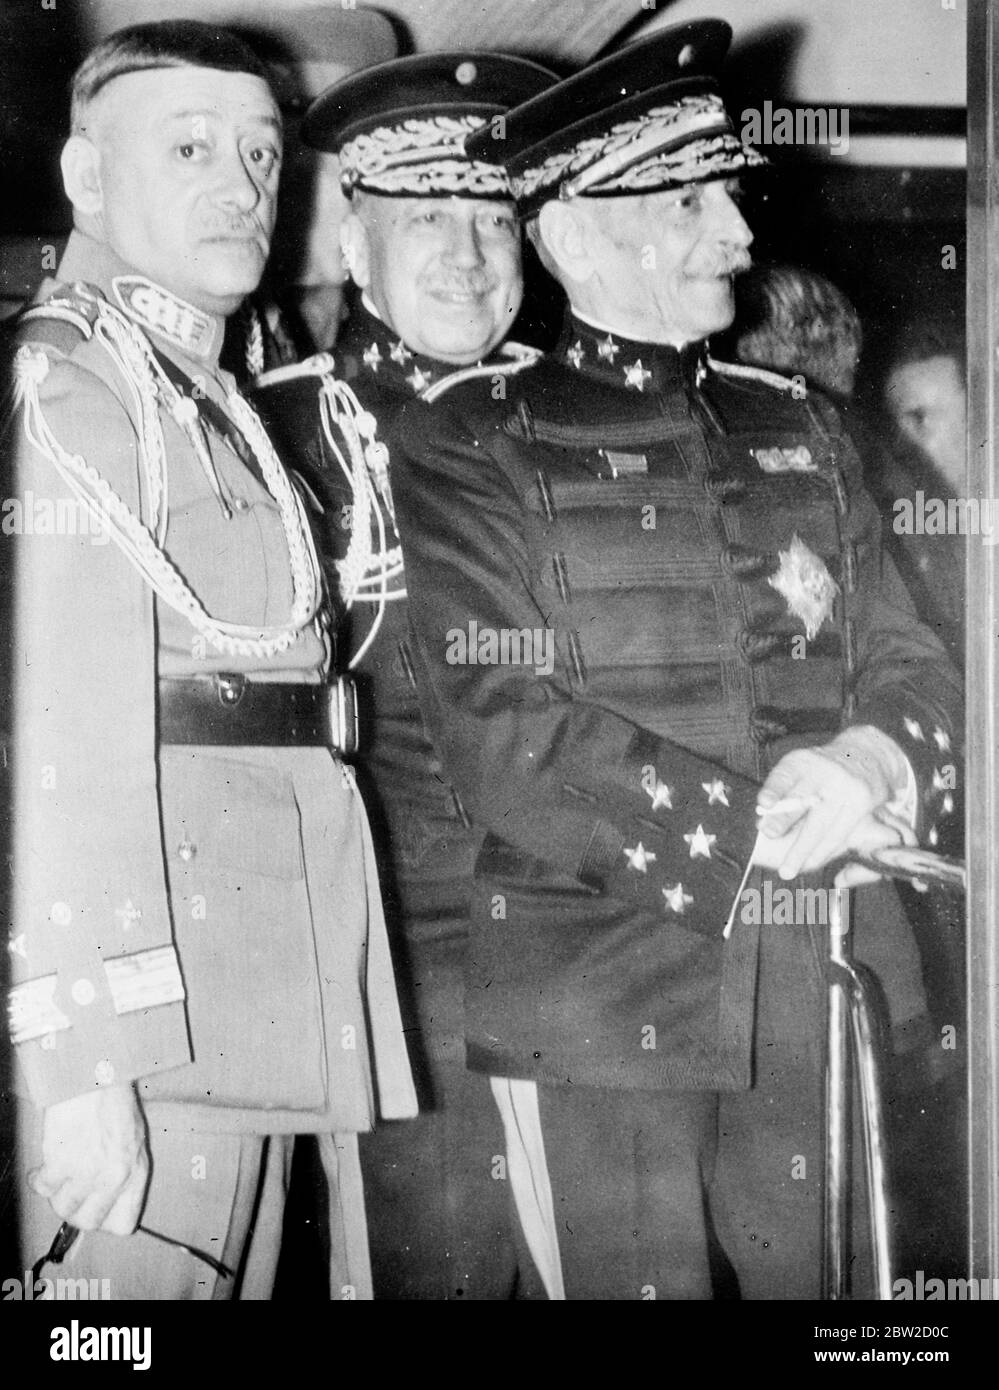 The first head of a foreign state to visit the Union of South Africa, President Carmona of Portugal received an instant enthusiastic welcome in Pretoria during his three-day stay in the Union of South Africa, after touring the Portuguese colonies in Africa. In a speech he reaffirmed the ancient friendship between his country and Great Britain. General Carmona (right) with General E. Mata (centre) in Pretoria. 22 August 1939 Stock Photo